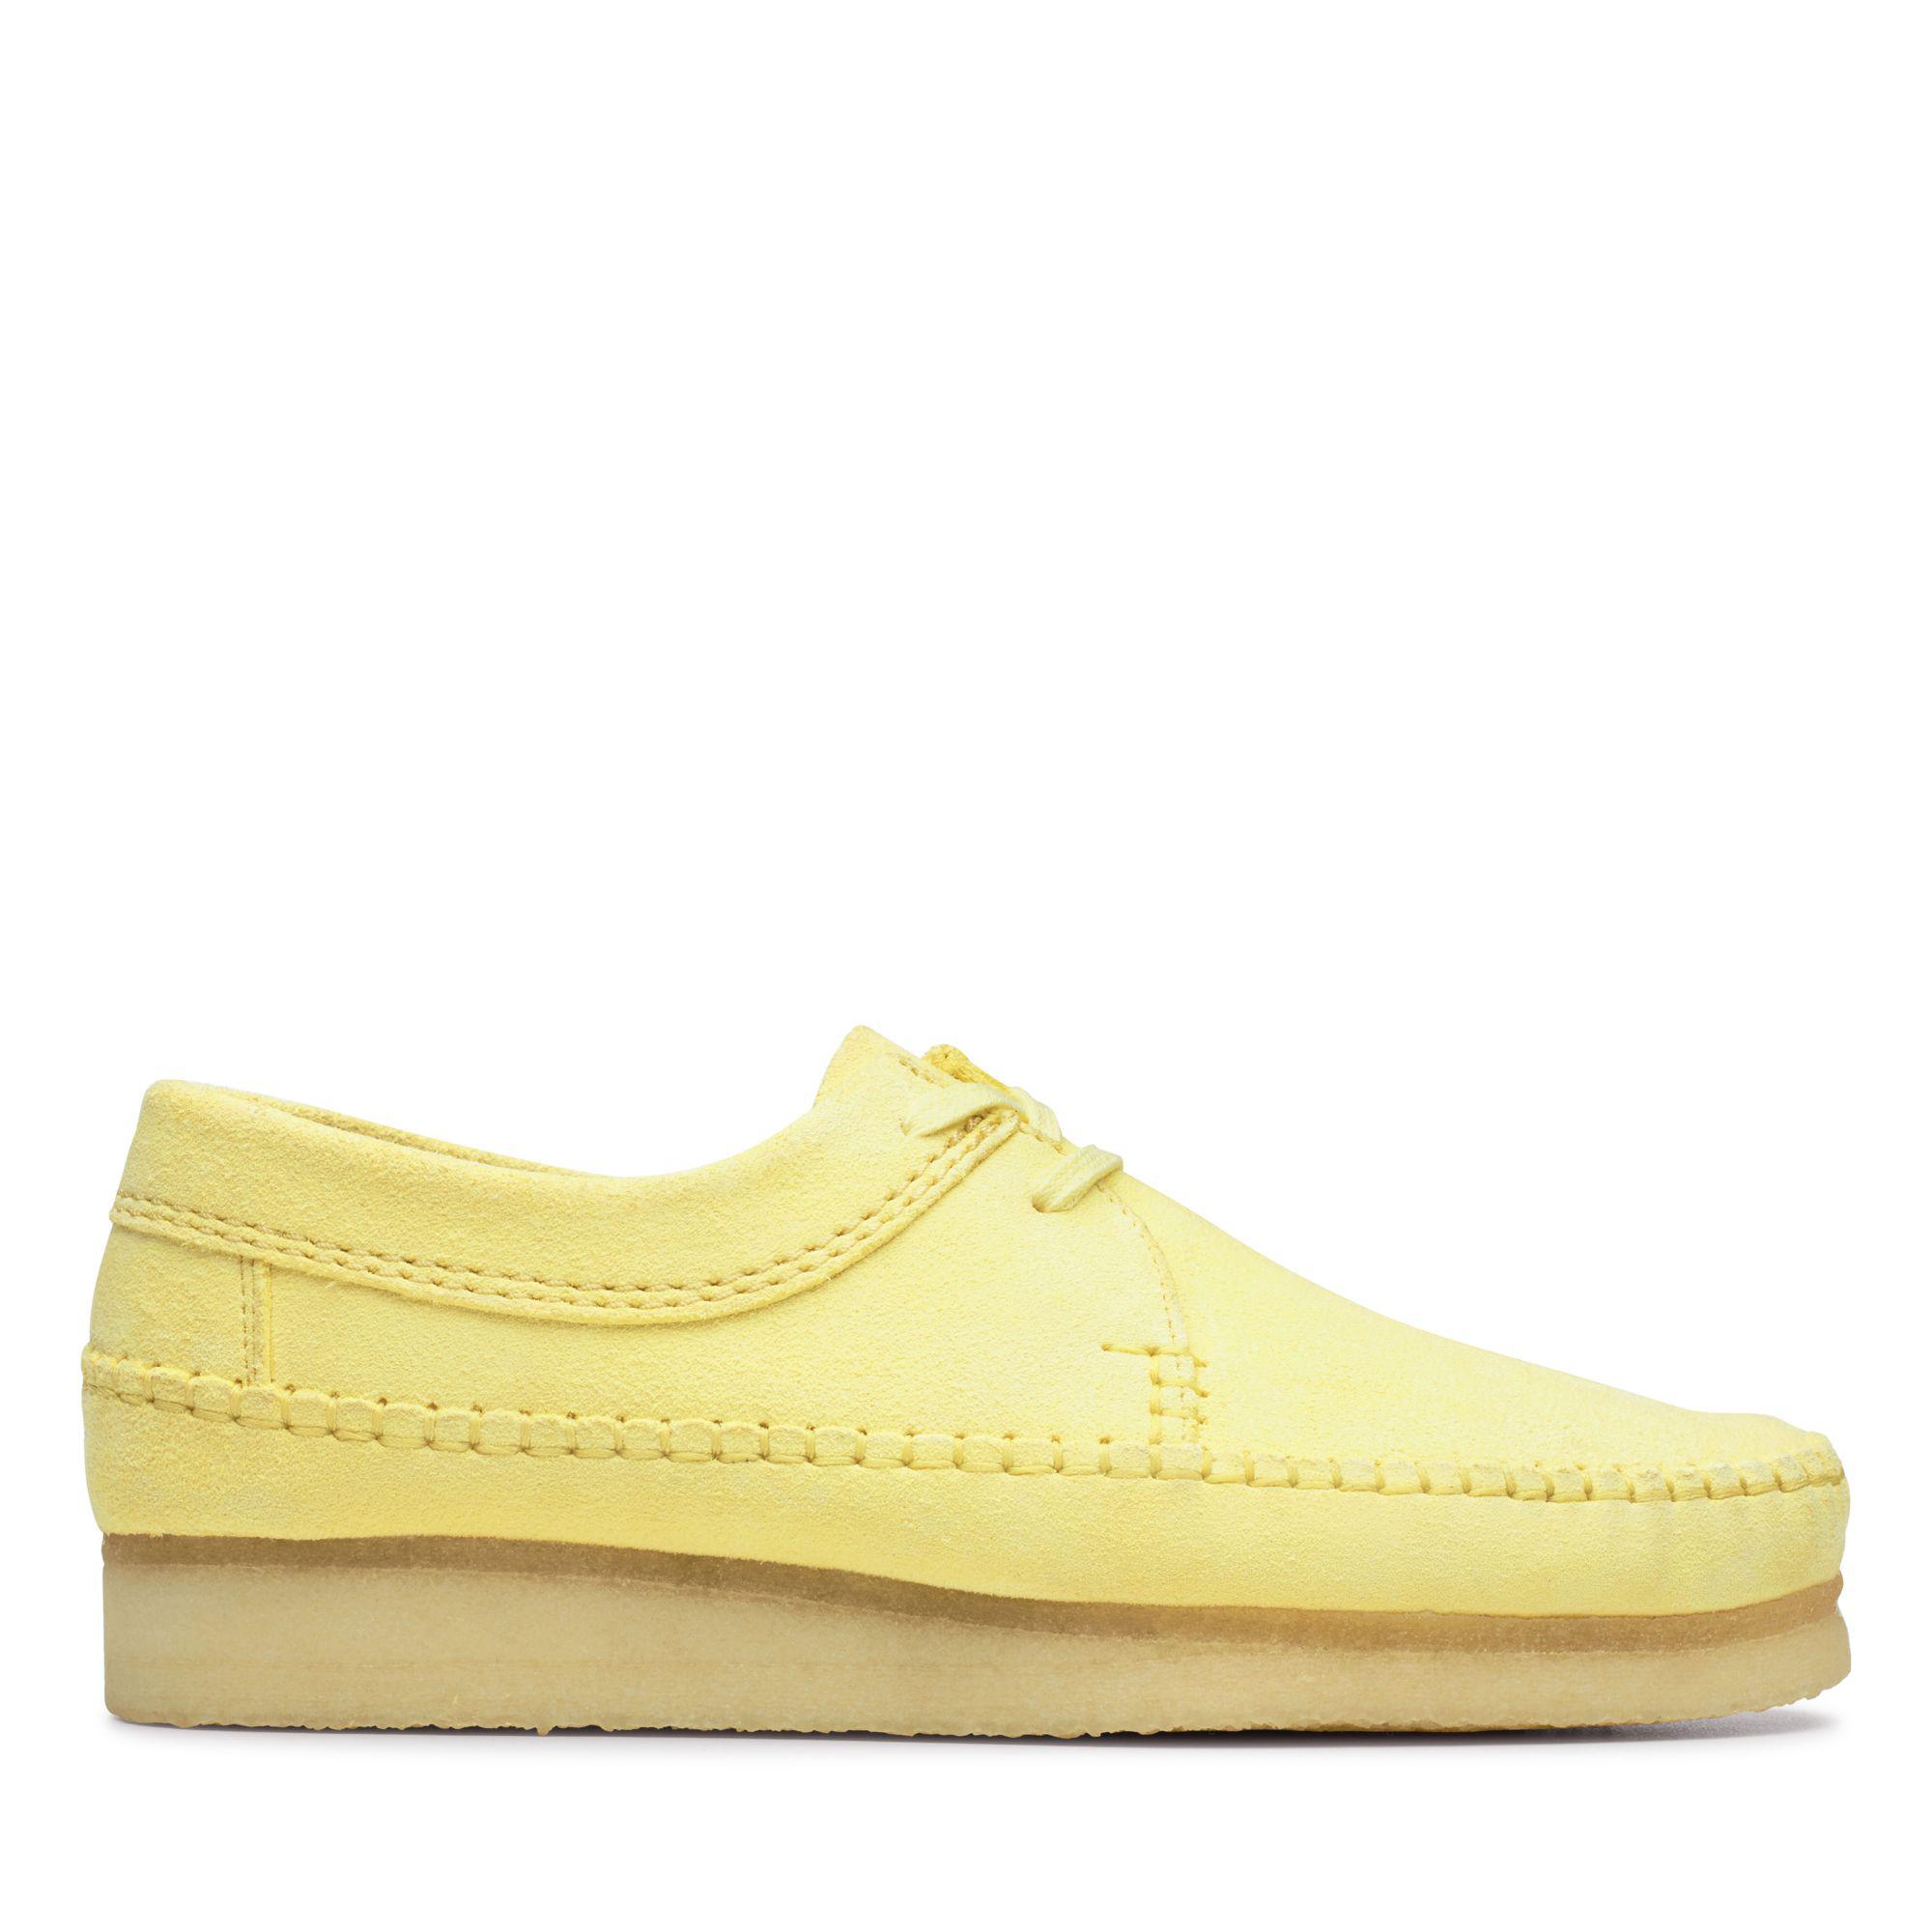 Clarks Suede Weaver in Pale Yellow (Yellow) for Men - Lyst